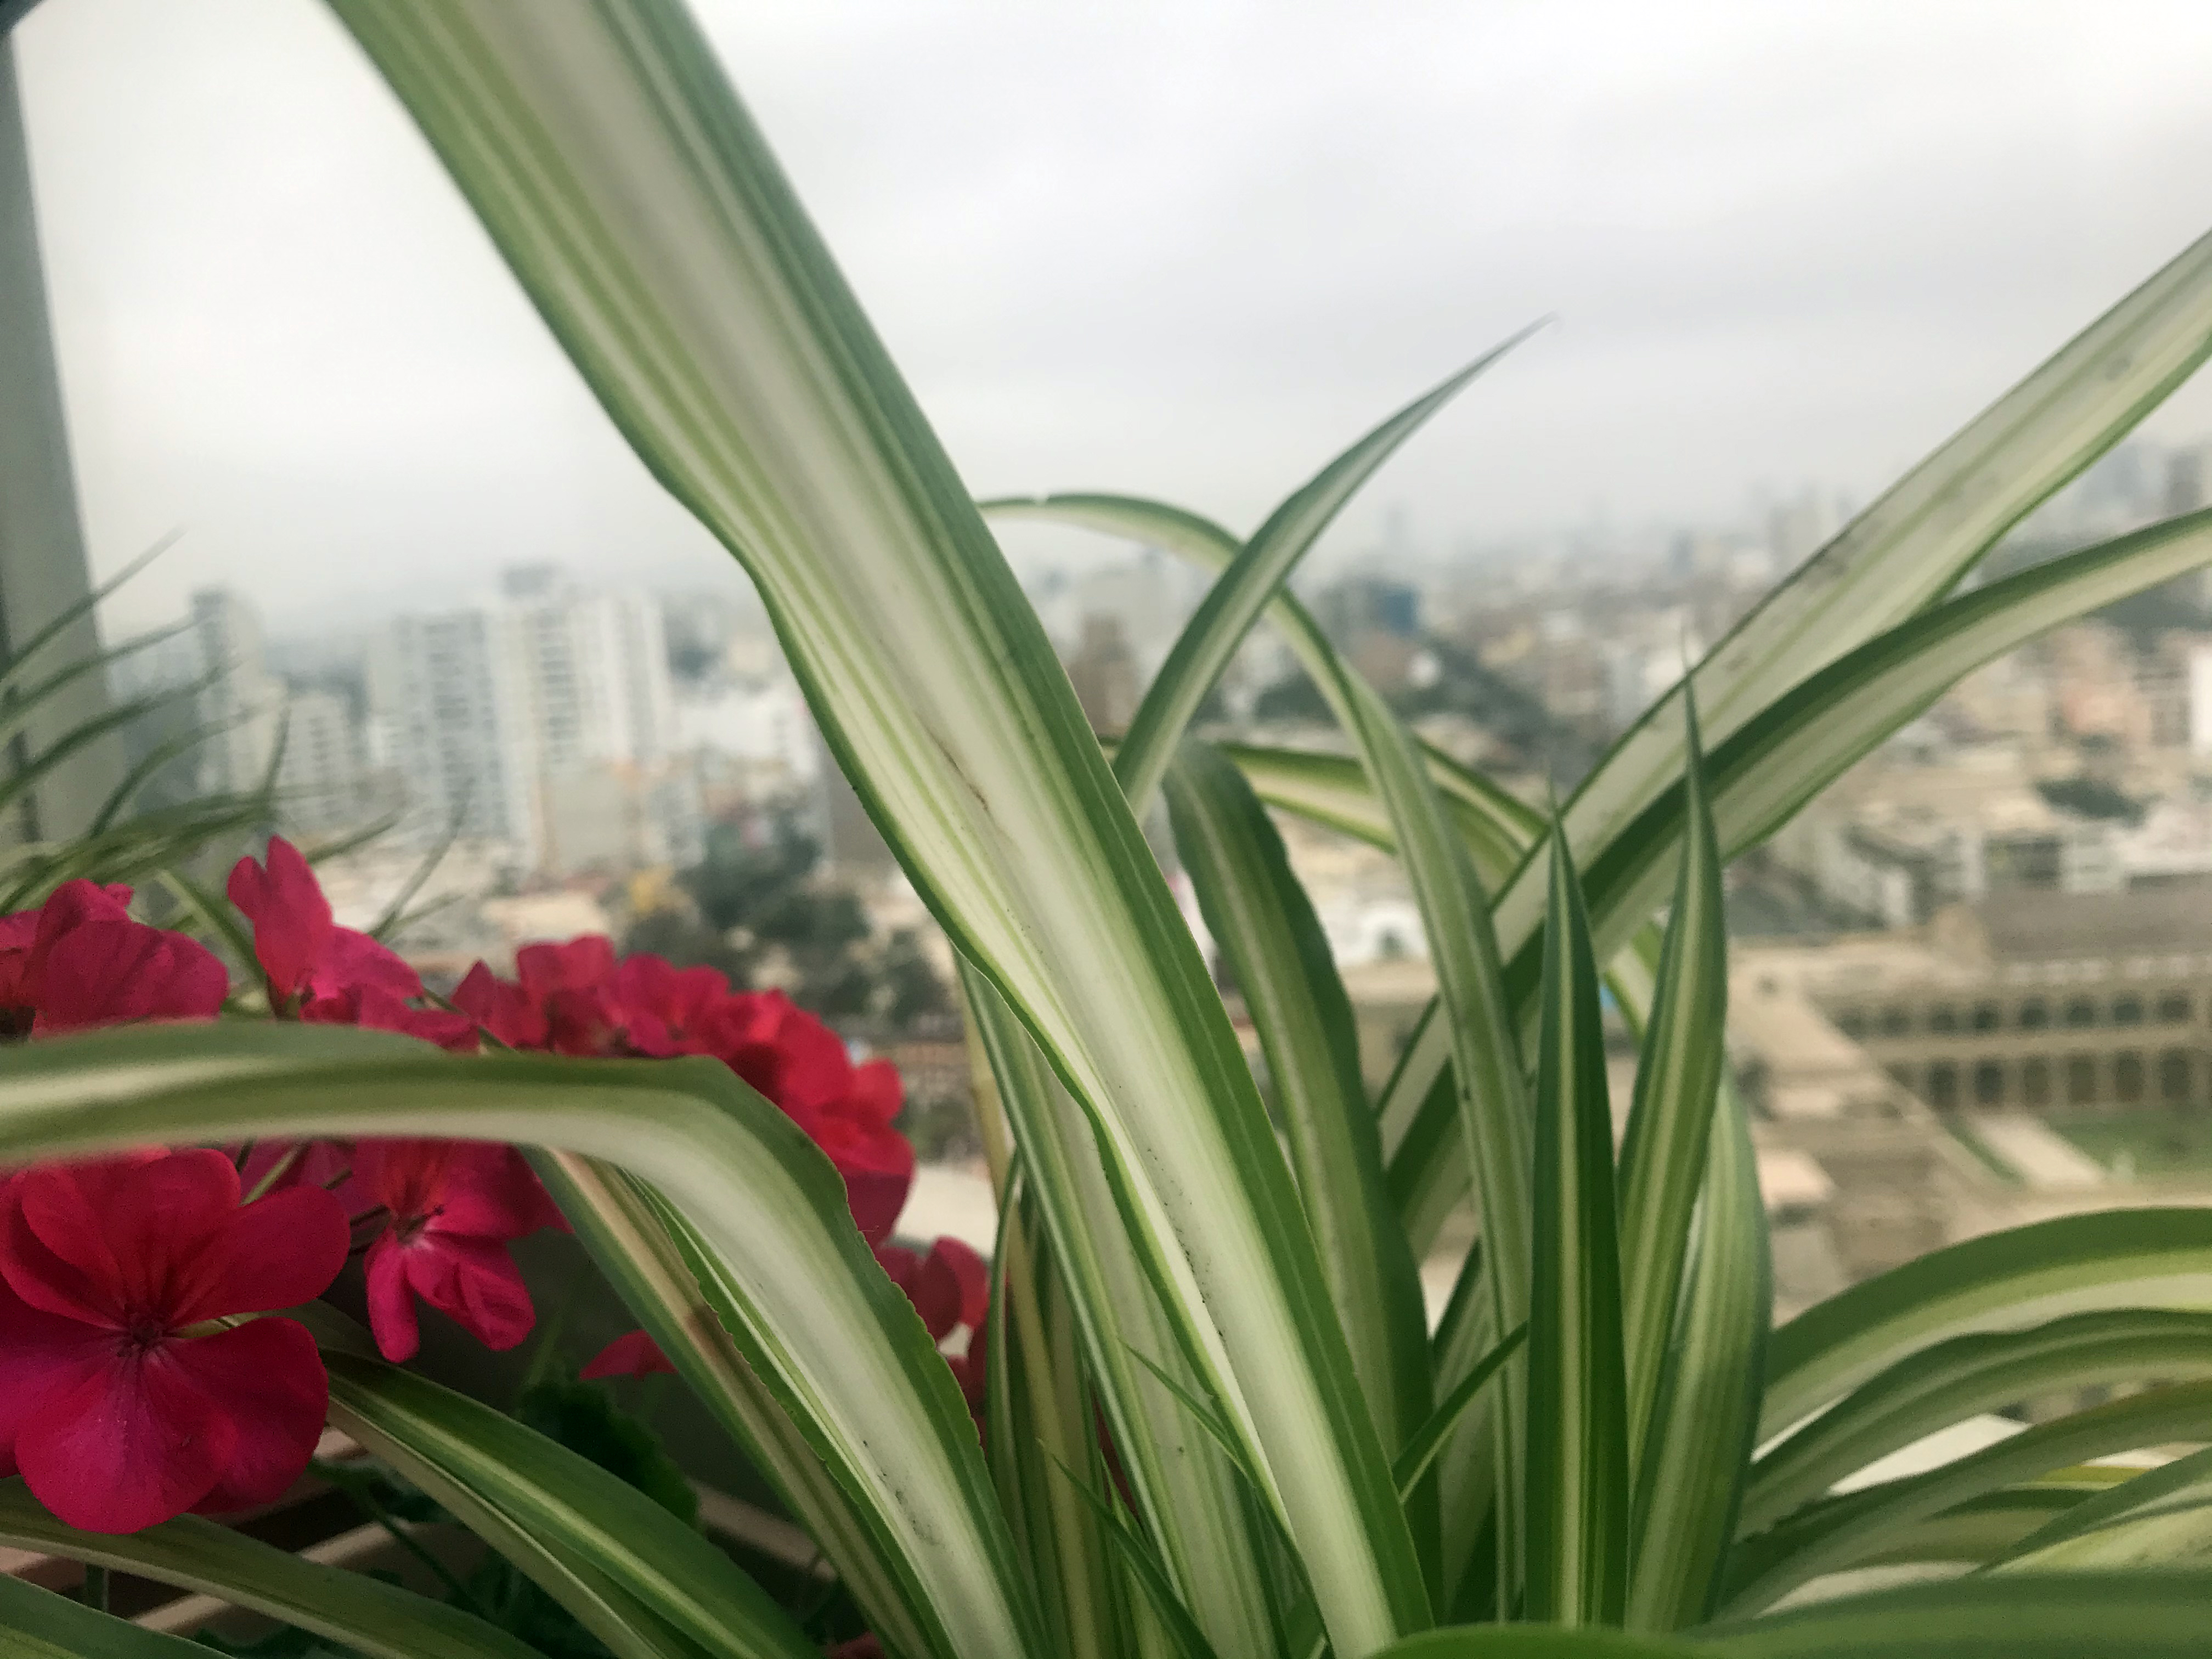 Against the background of the concrete jungle in Lima, a flower provides a sign of beauty and resistance.